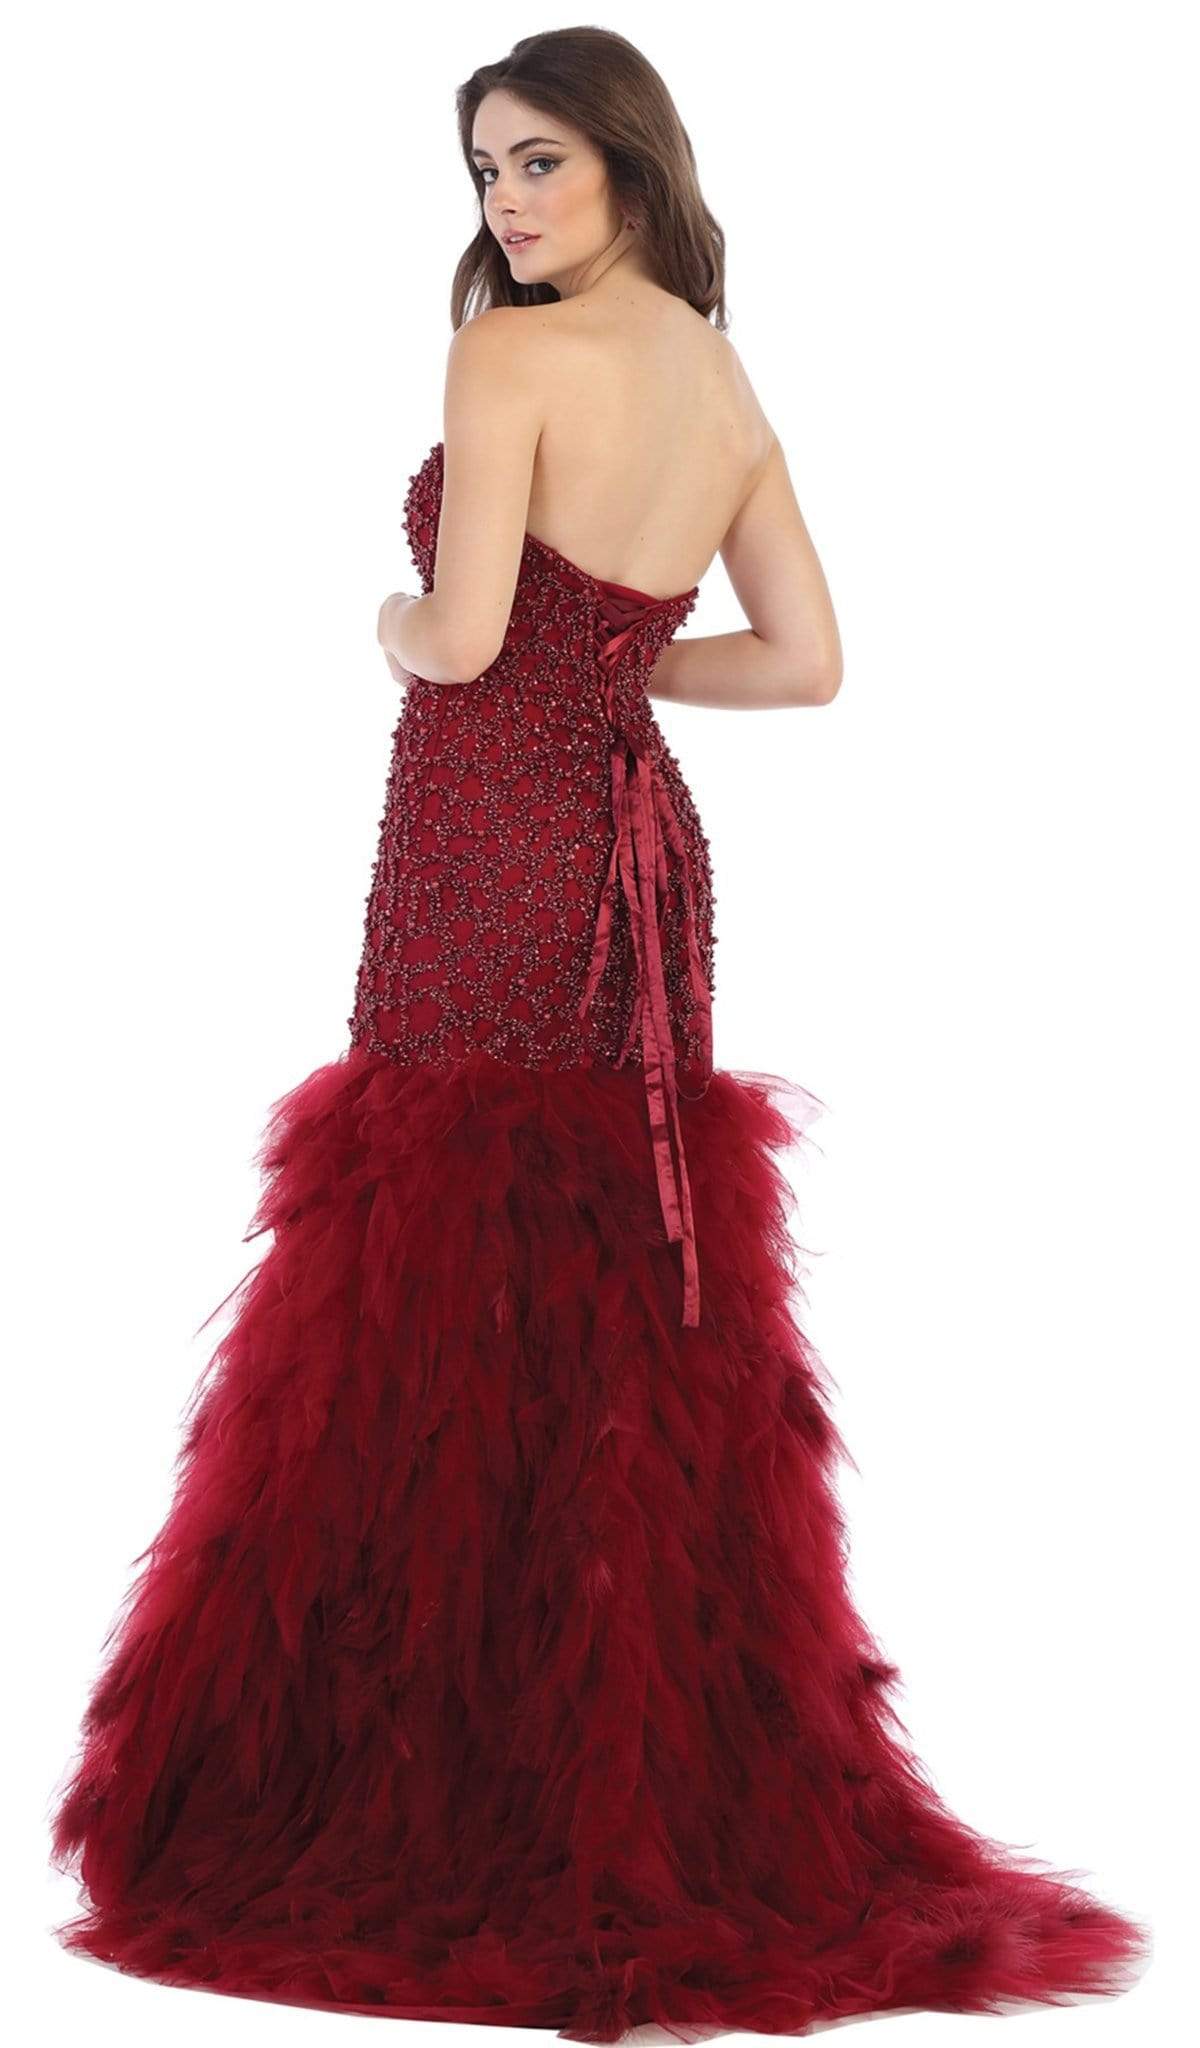 May Queen - RQ7668 Strapless Crystal Ornate Feathered Tulle Gown Special Occasion Dress